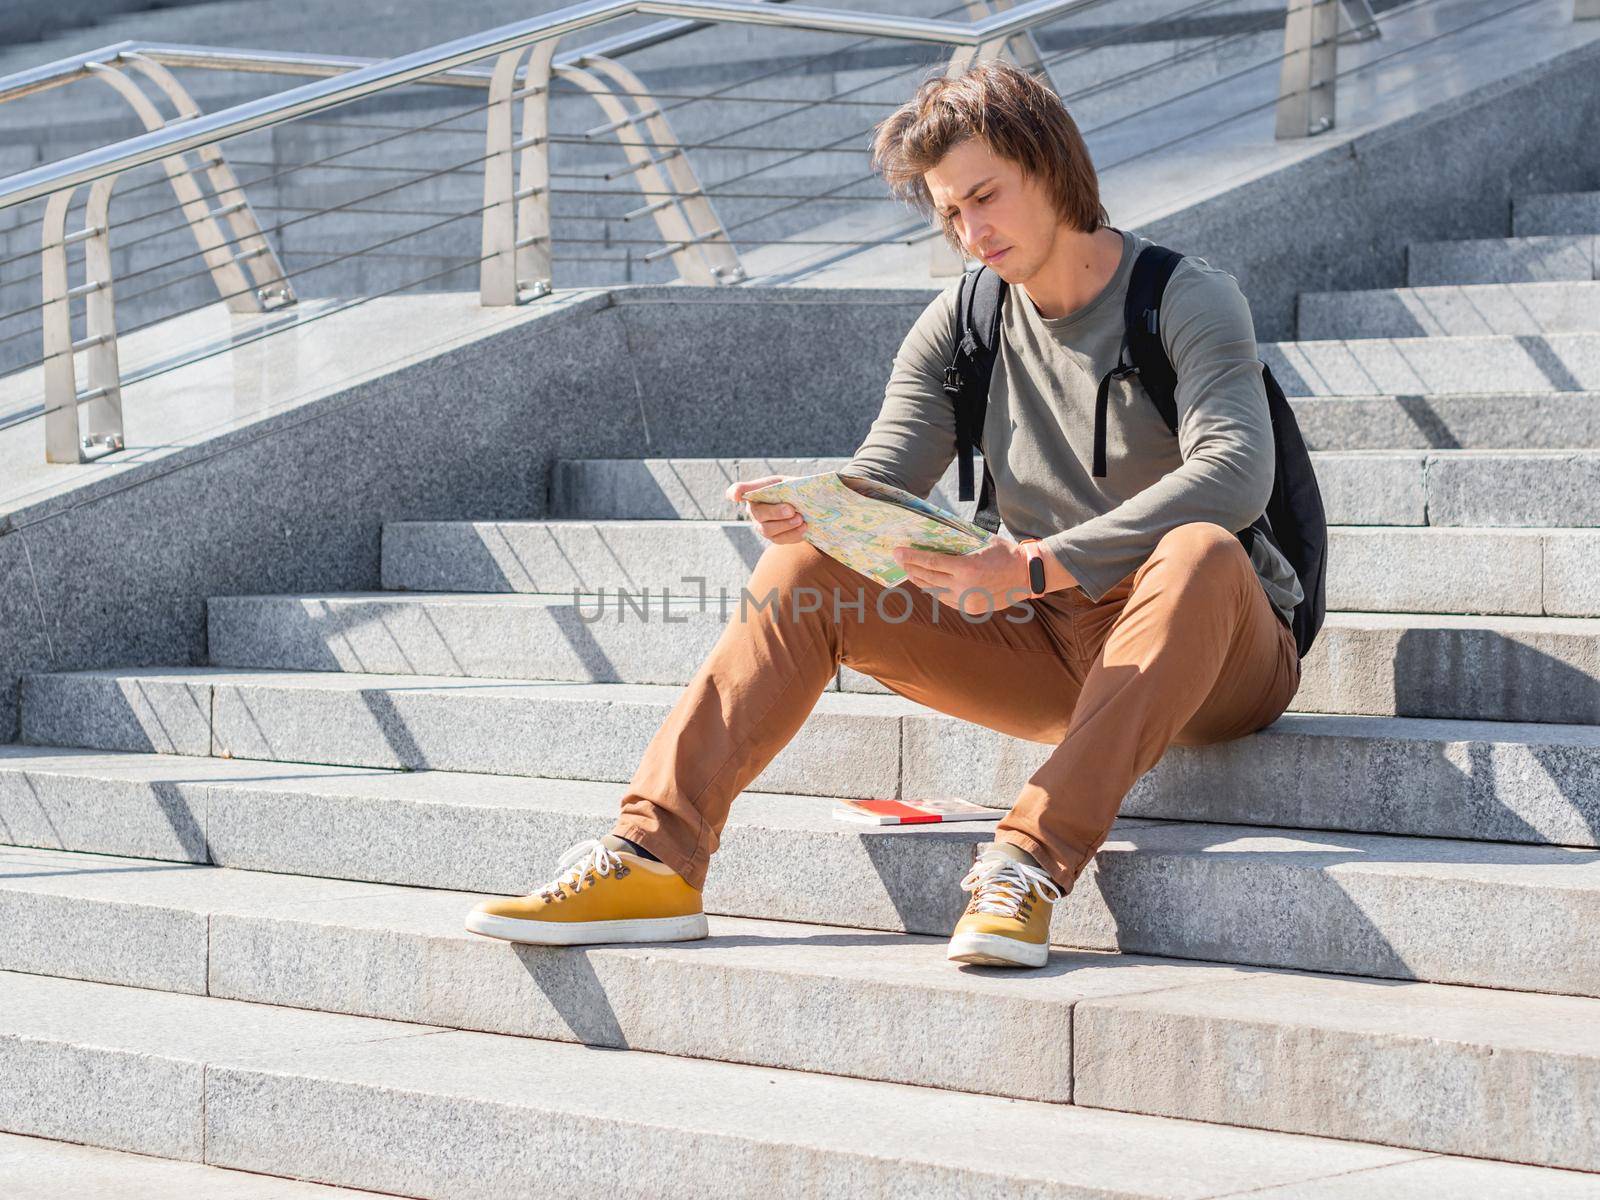 Man sits on stone staircase and reads map. Solo-travelling around city. Urban tourism. Modern architectural landmarks. by aksenovko